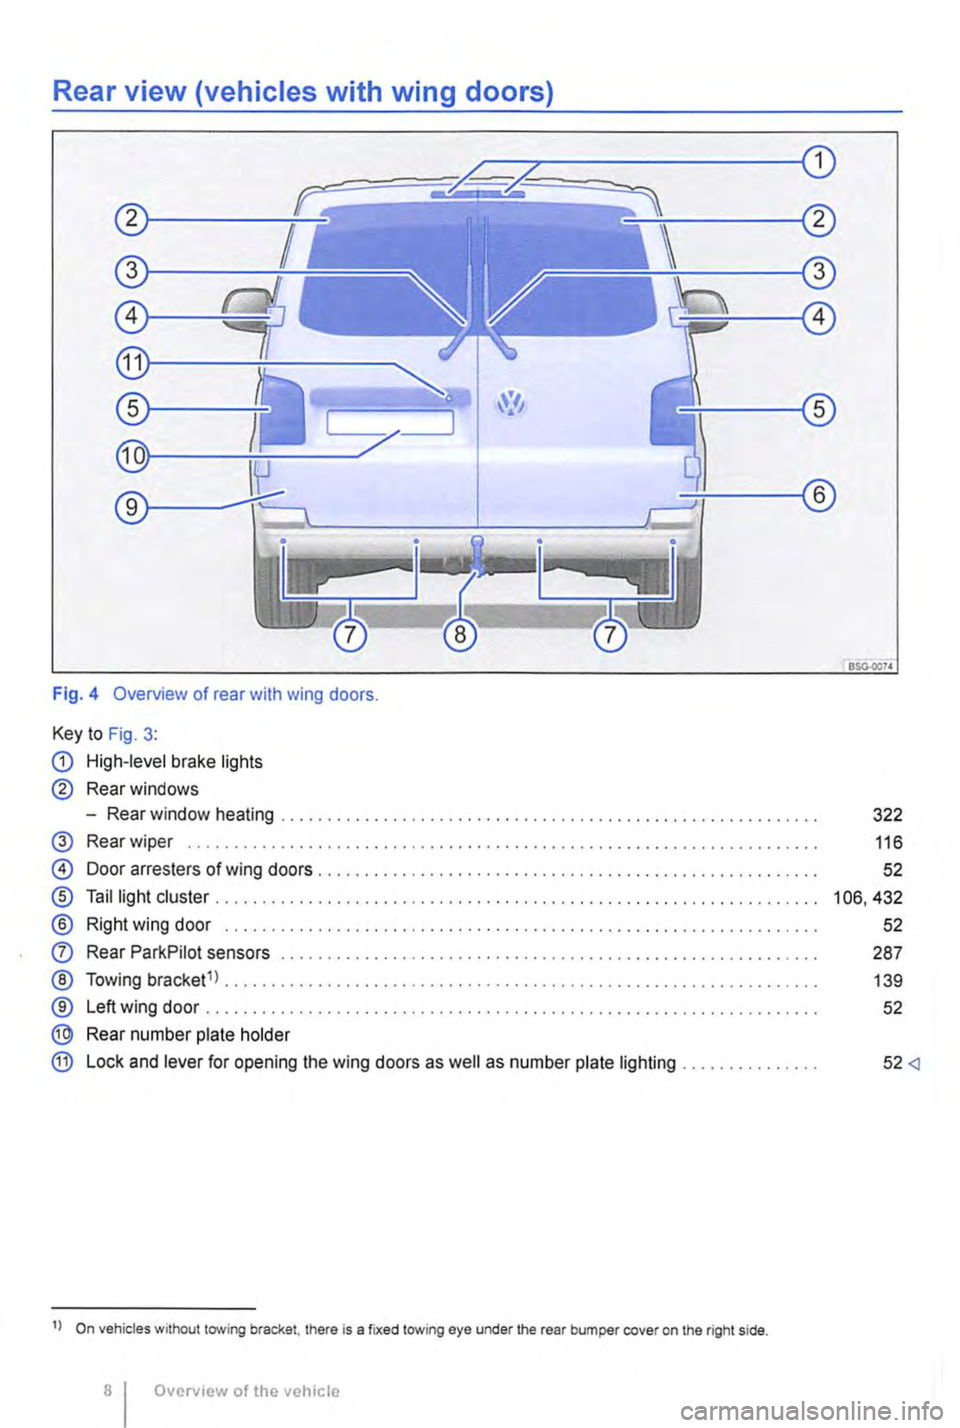 VOLKSWAGEN TRANSPORTER 2018  Owners Manual Rear view (vehicles with wing doors) 
Fig. 4 Overview of rear with wing doors. 
Key to Fig. 3: 
G) High-level brake lights 
® Rear windows 
-Rear window heating ......................................